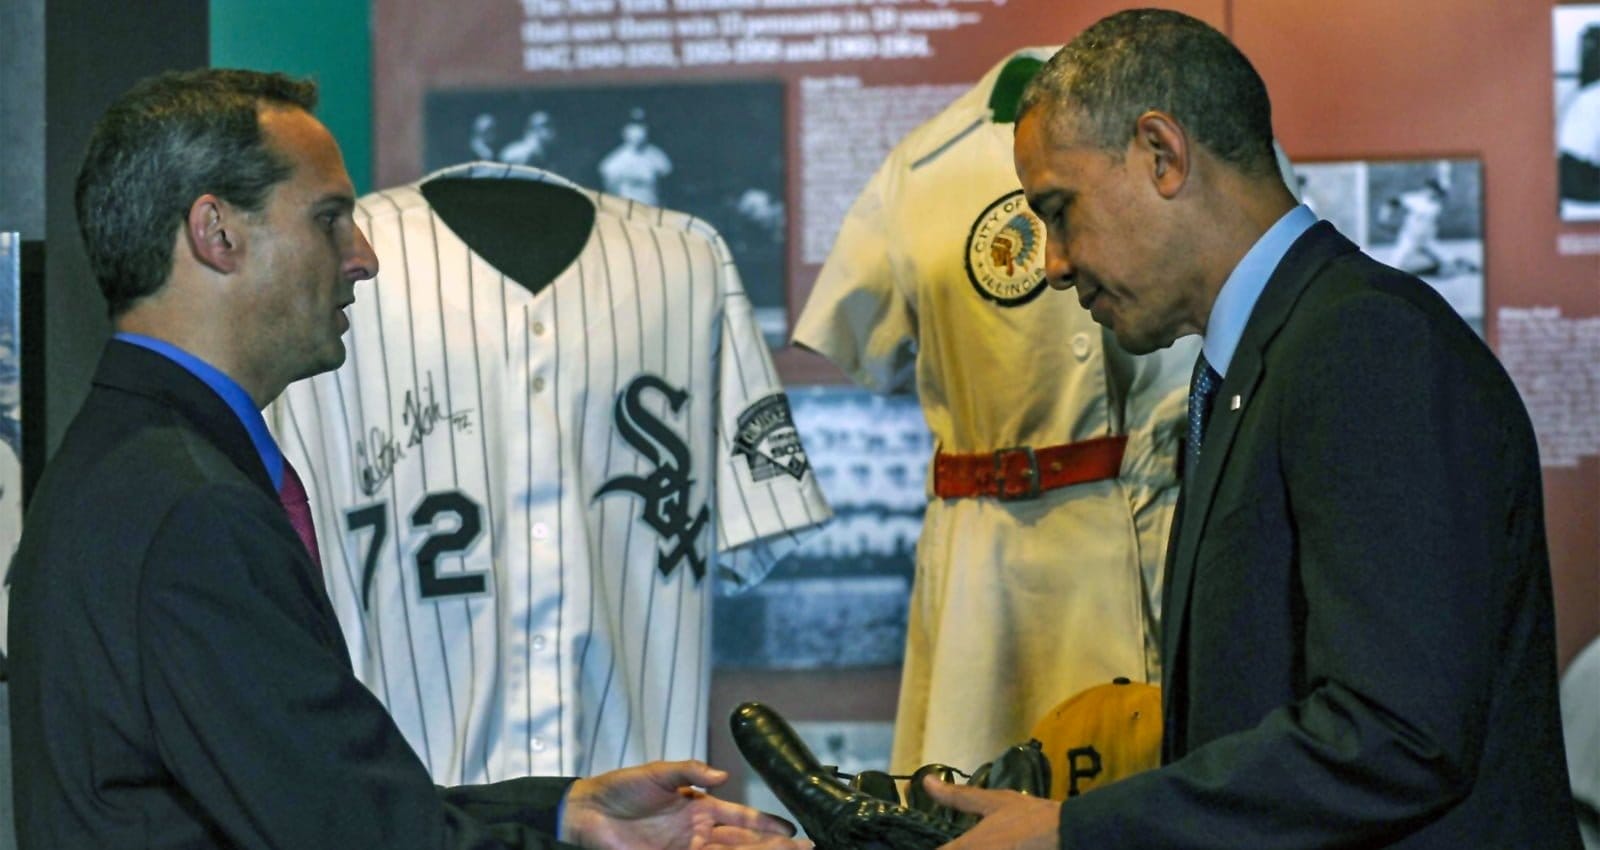 Jeff Idelson with former President Obama at the Hall of Fame Museum. | Photo Courtesy of National Baseball Hall of Fame and Museum